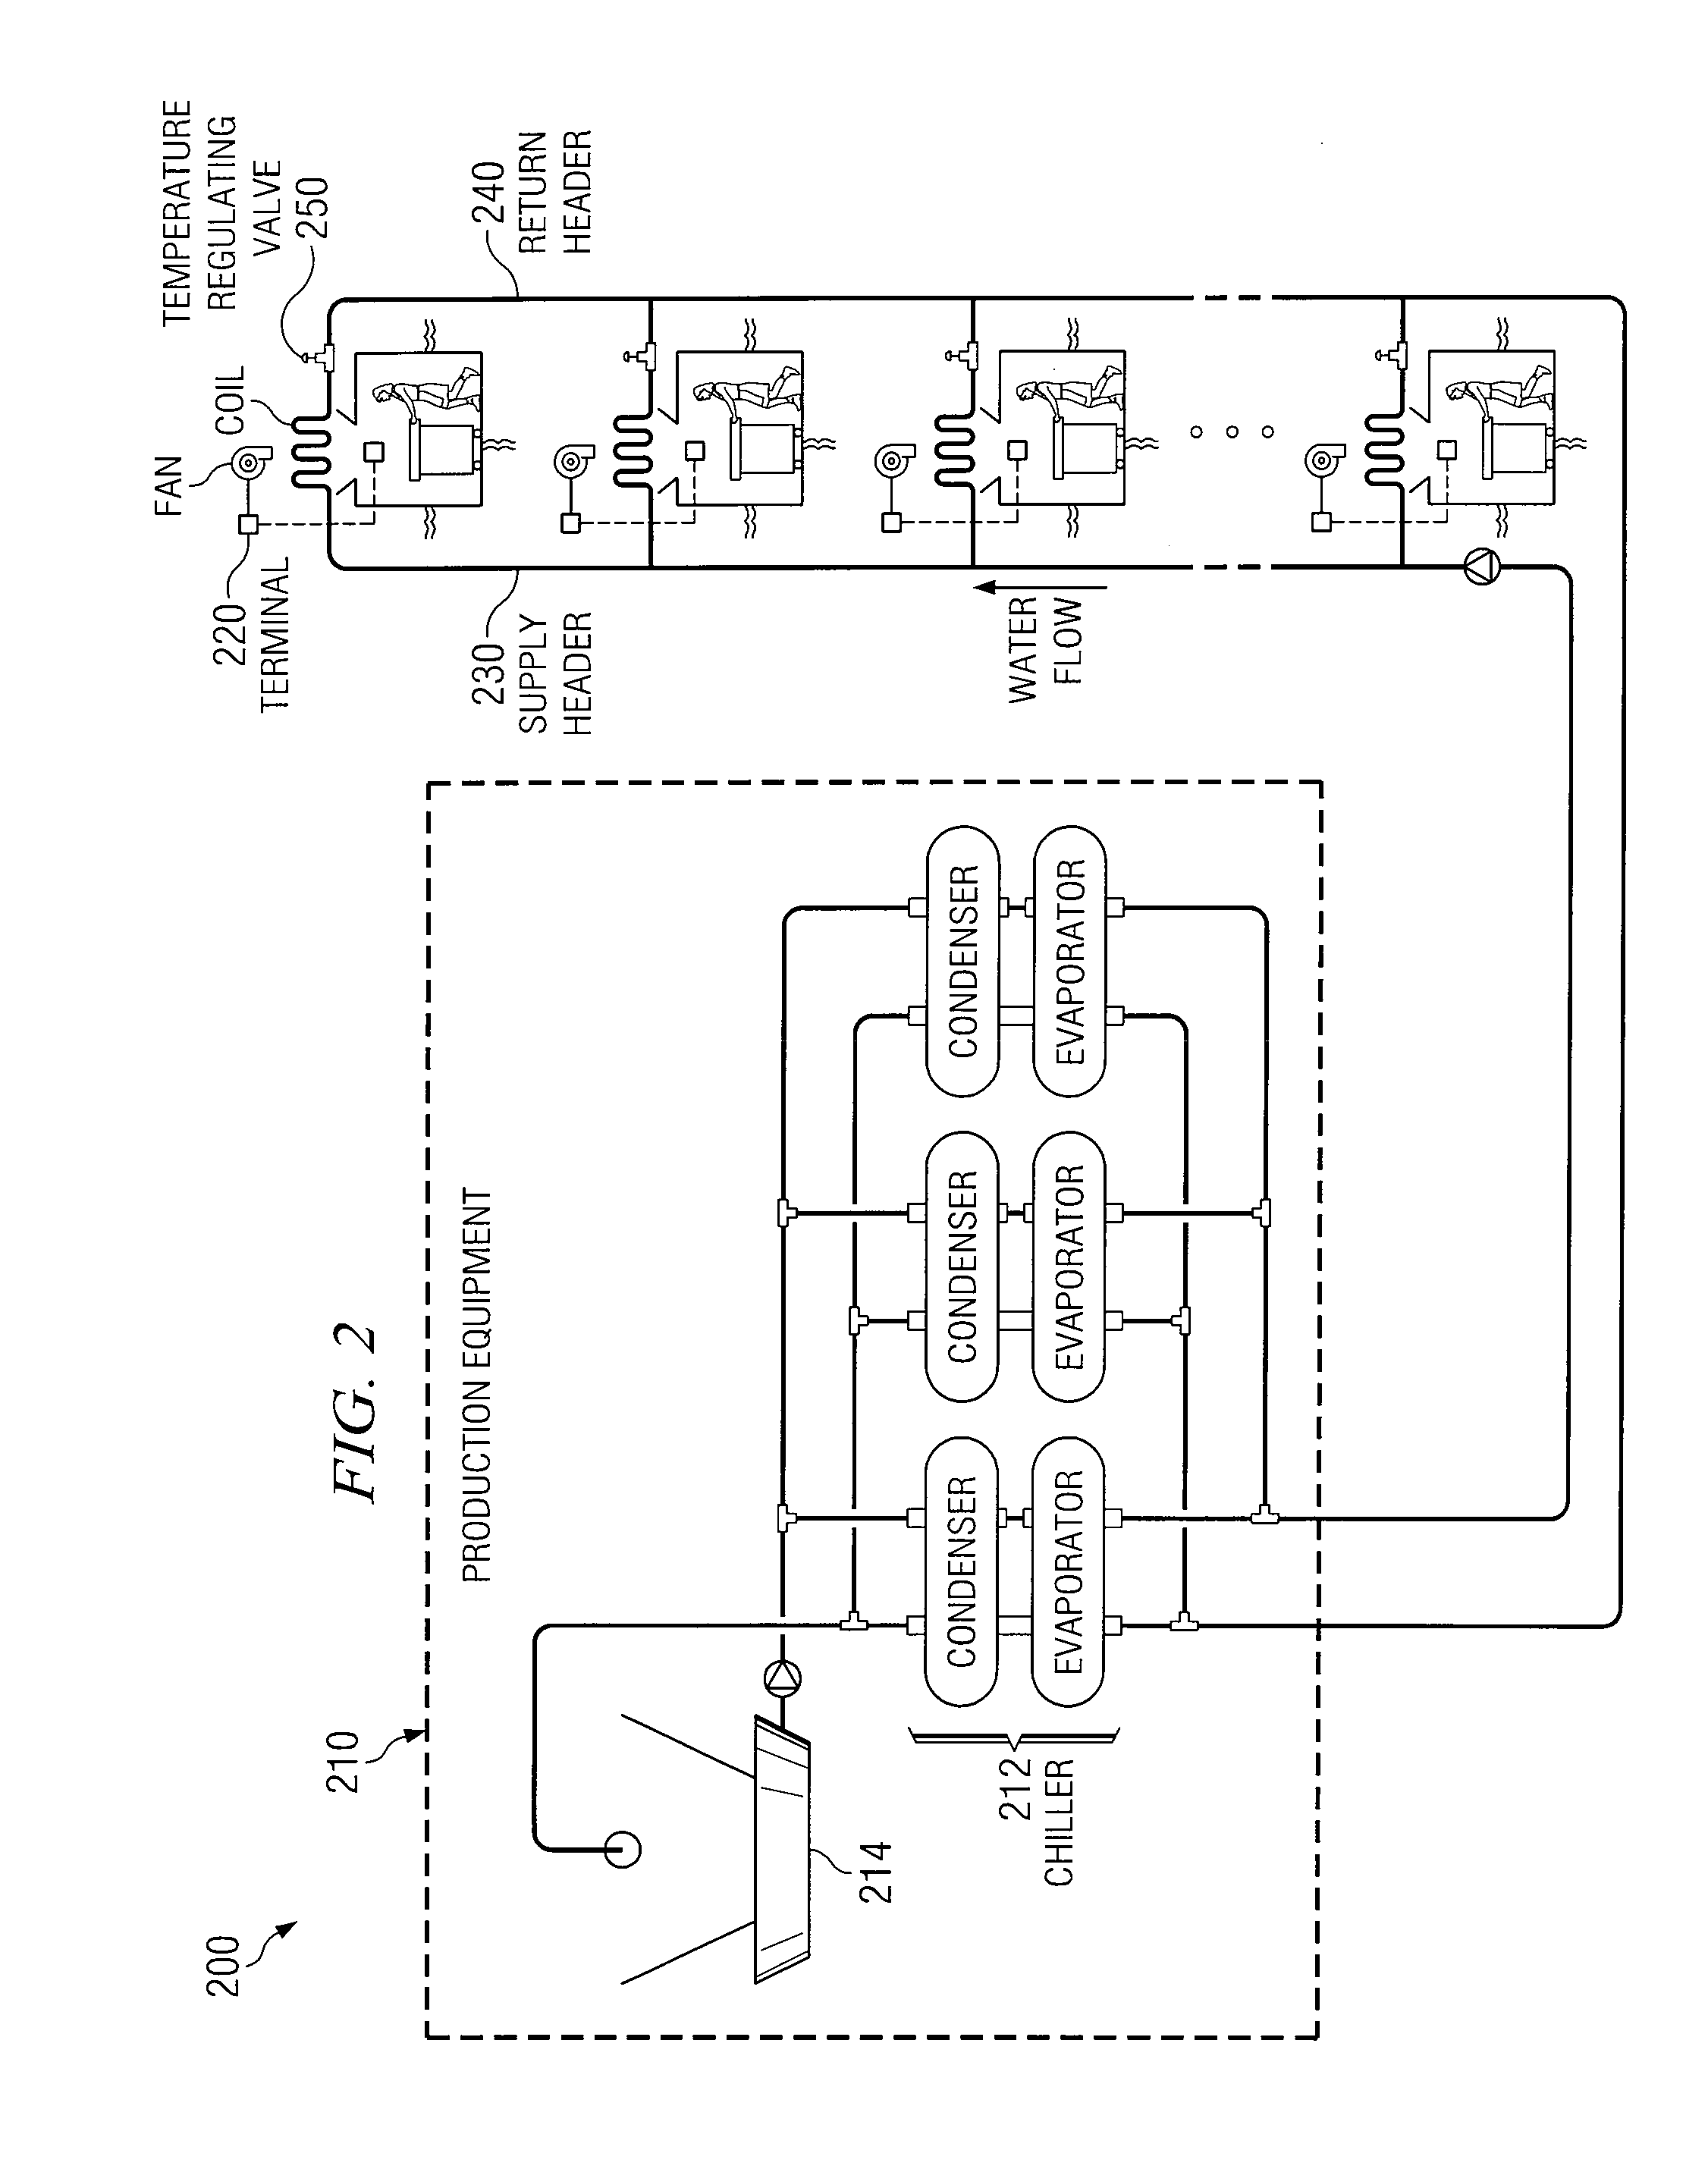 Electronically Based Control Valve with Feedback to a Building Management System (BMS)